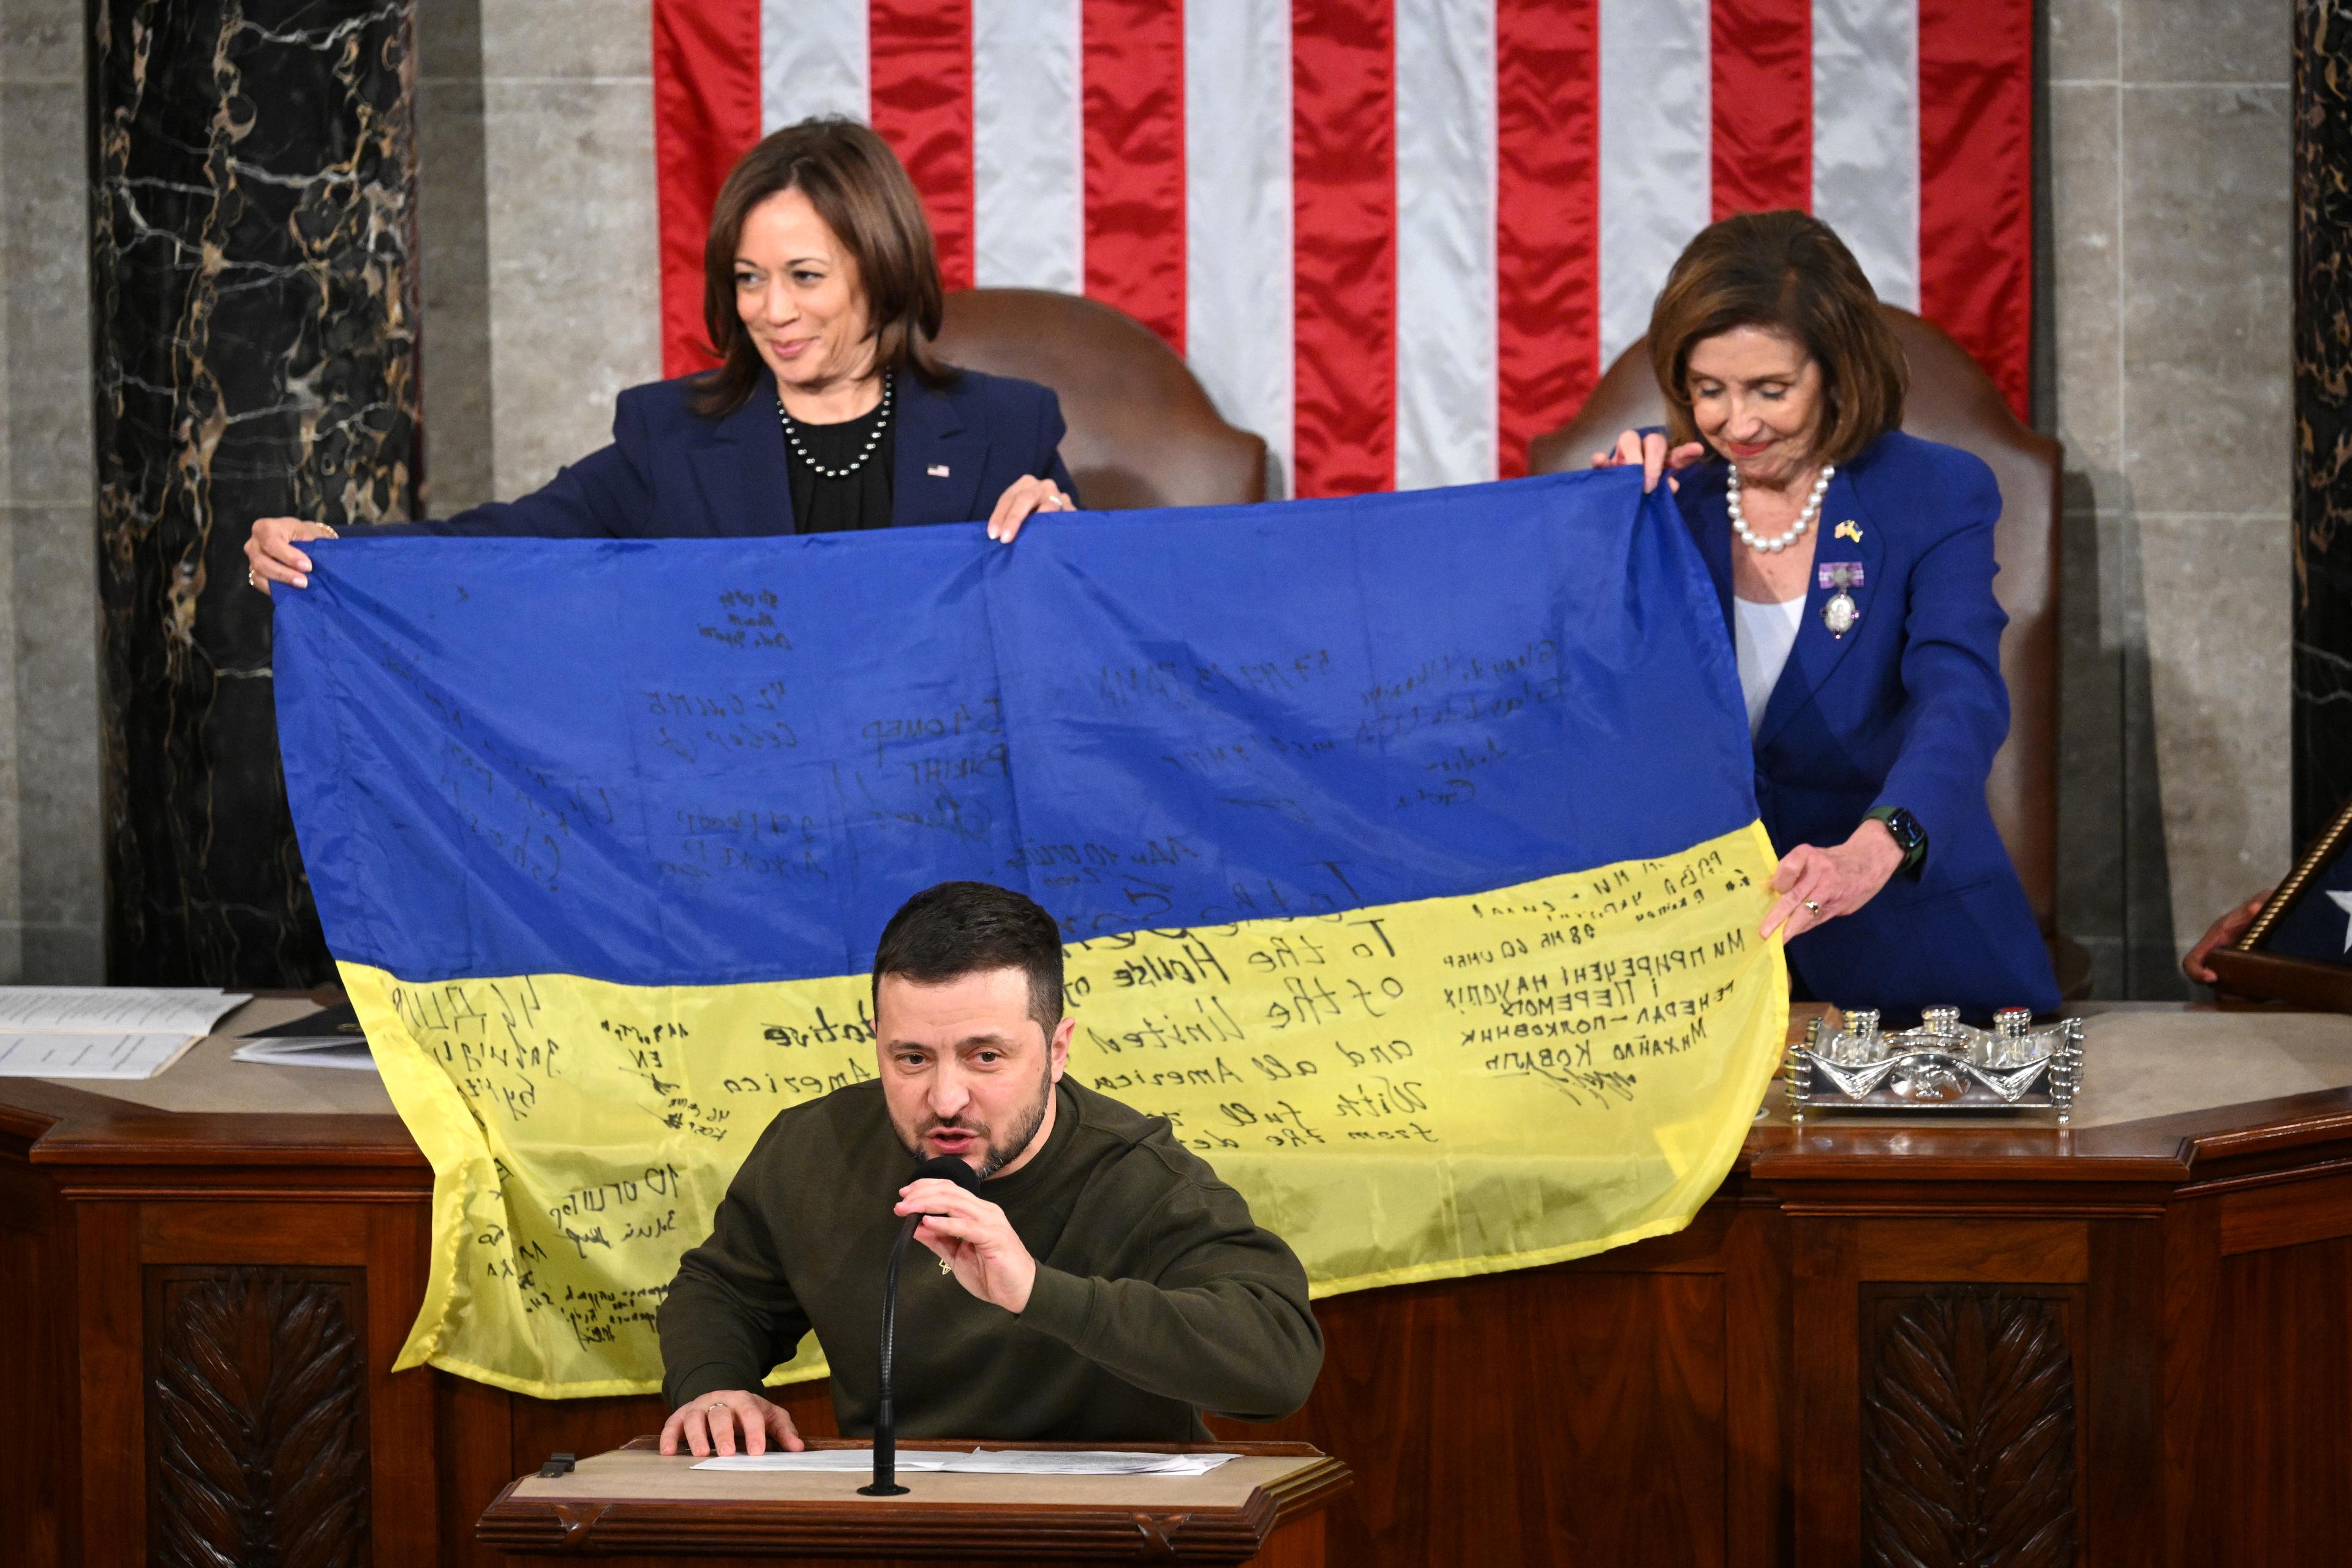 Ukraine's President Volodymyr Zelensky speaks after giving a Ukrainian national flag to US House Speaker Nancy Pelosi (D-CA) and US Vice President Kamala Harris (L) during his address the US Congress at the US Capitol in Washington, DC on December 21, 2022. - Zelensky is in Washington to meet with US President Joe Biden and address Congress -- his first trip abroad since Russia invaded in February. (Photo by Mandel NGAN / AFP)